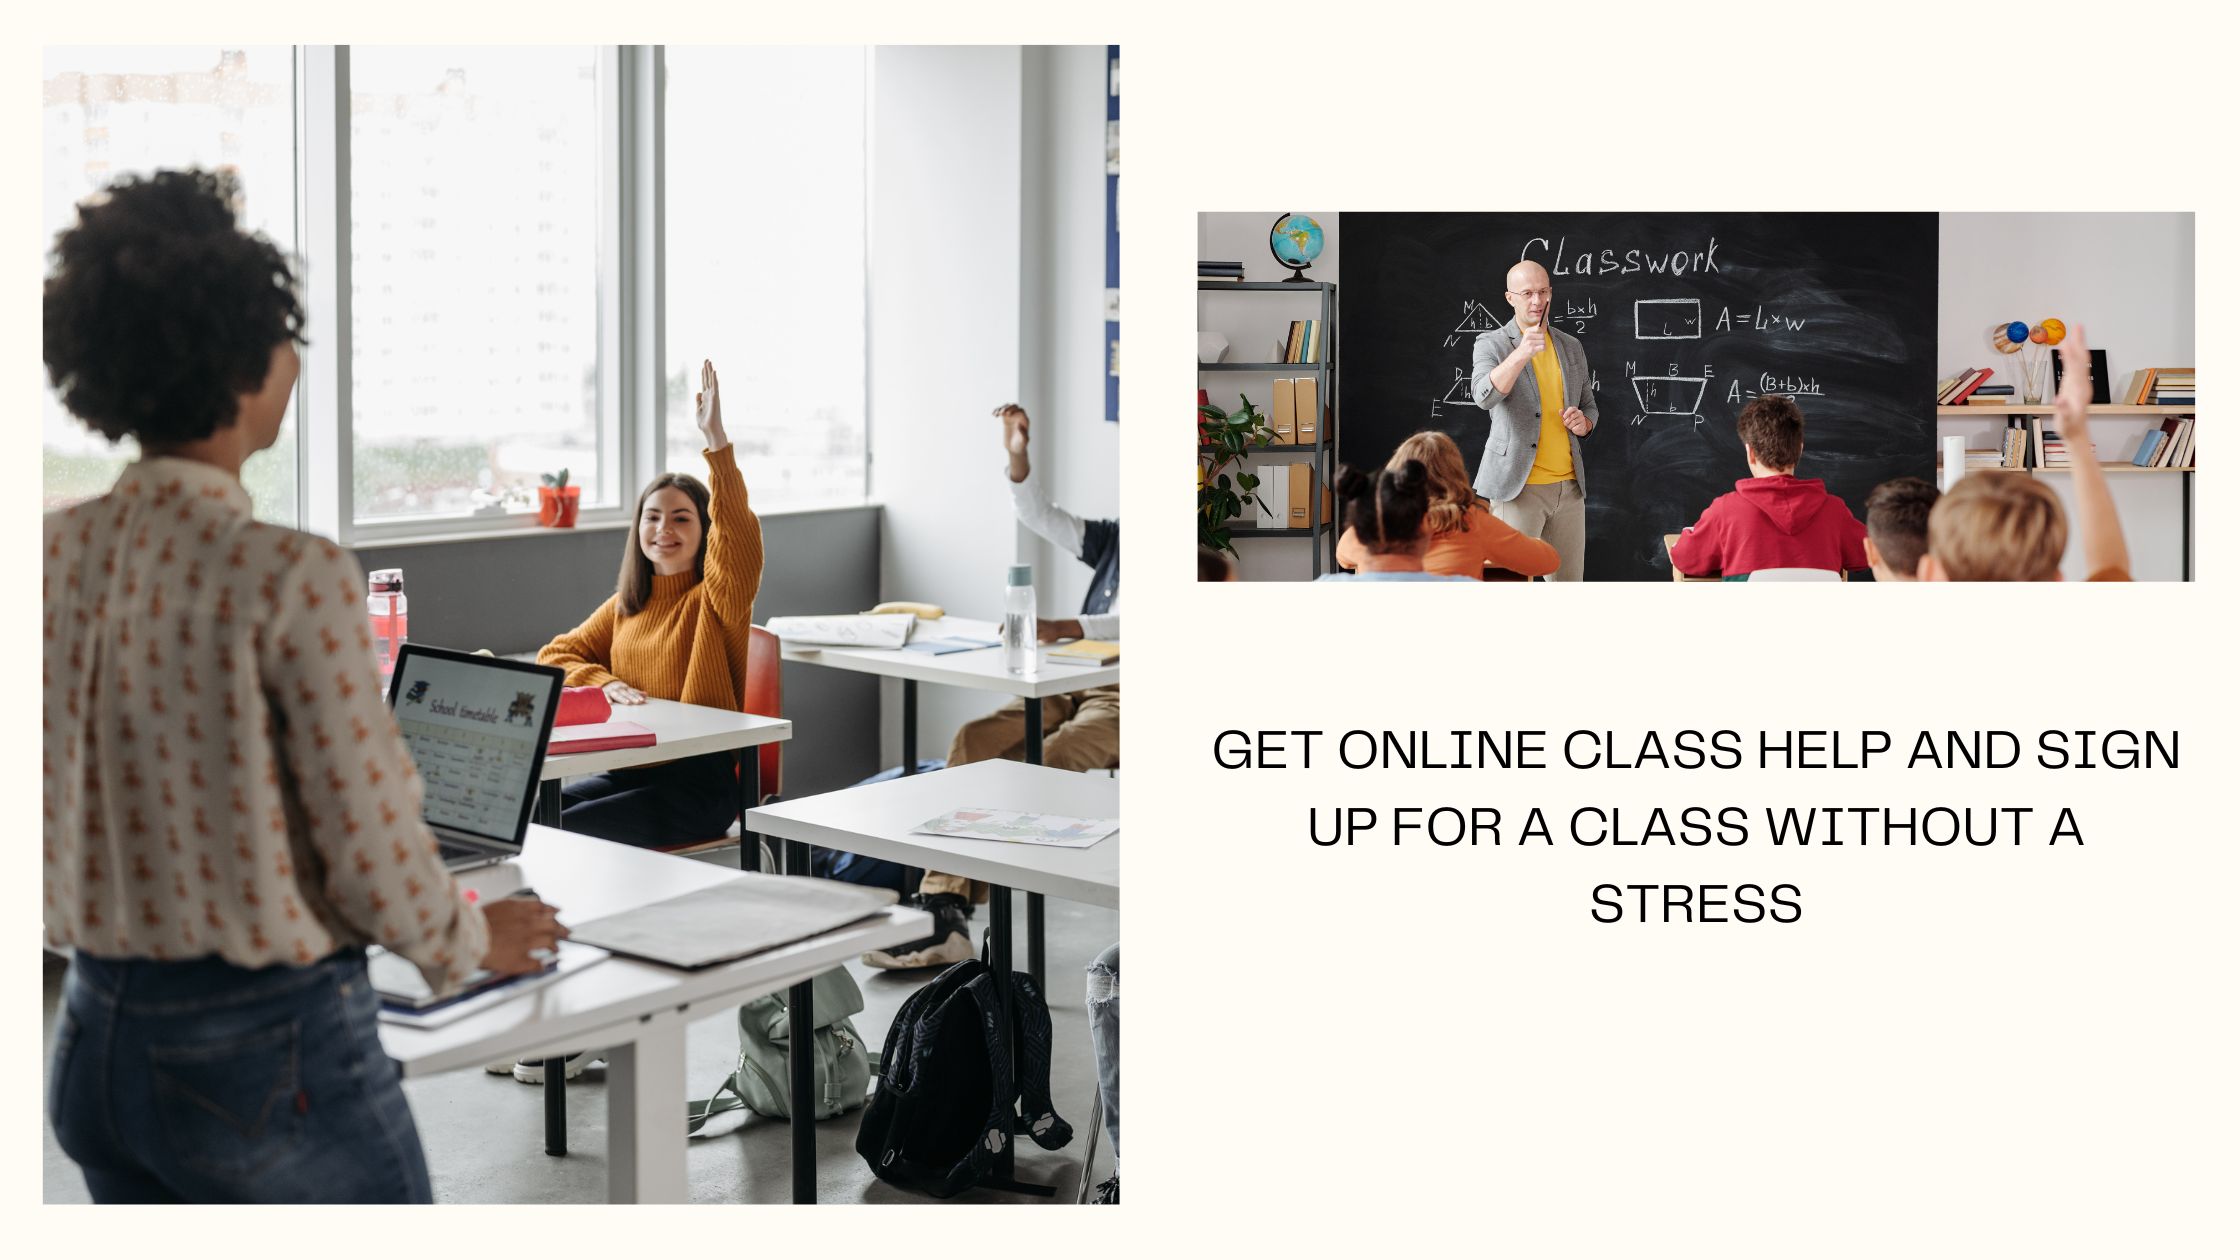 Get Online Class Help And Sign Up For A Class Without A Stress